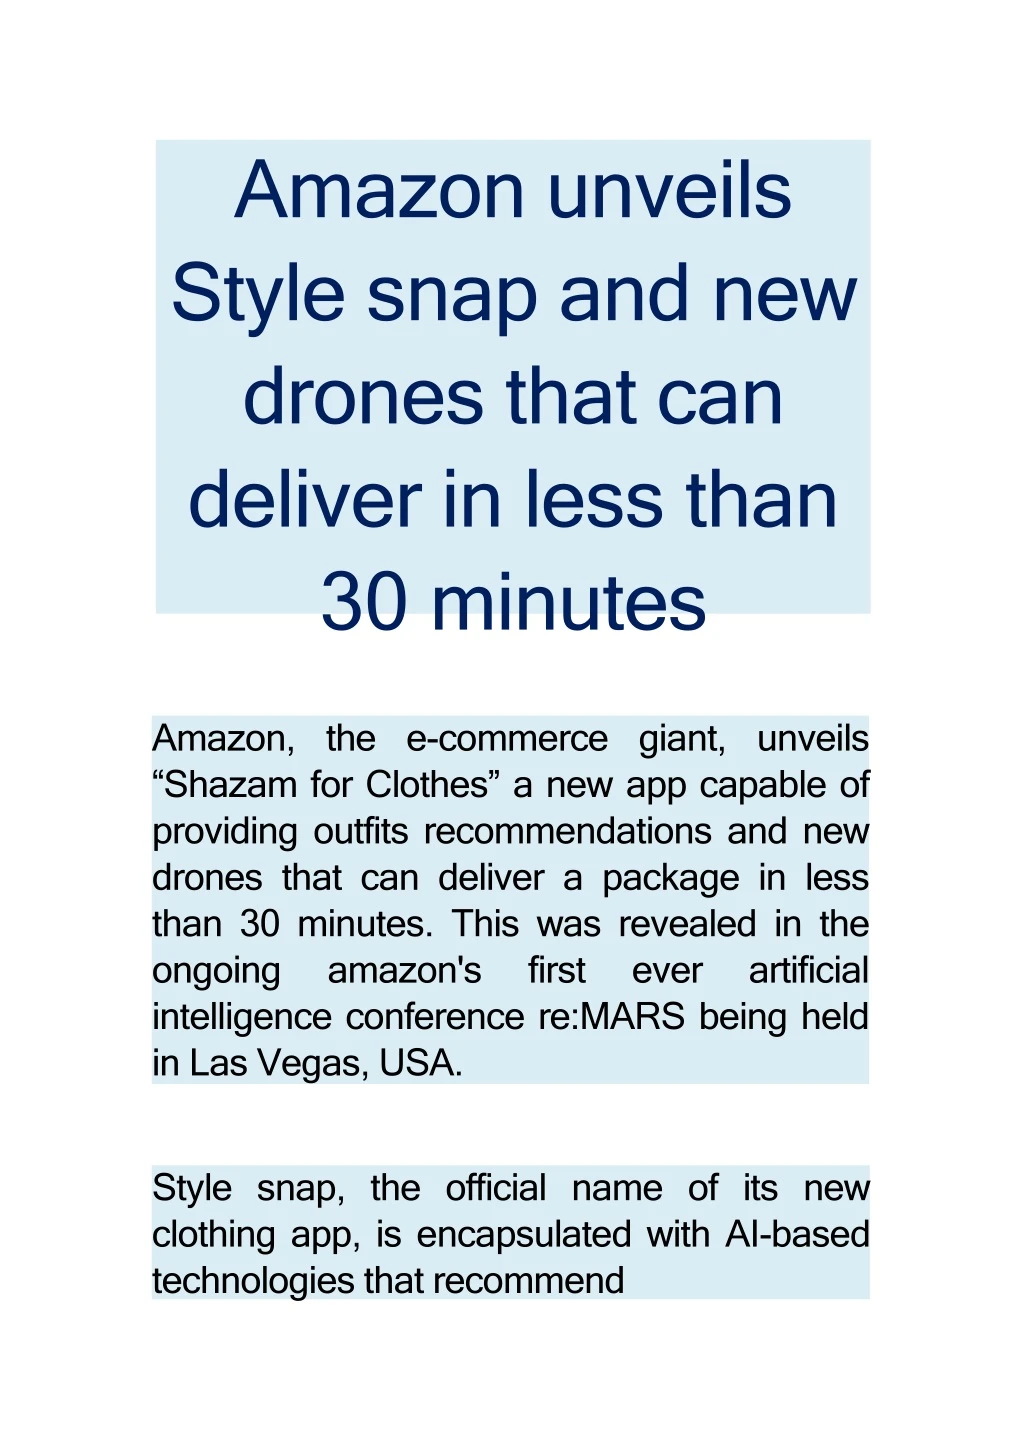 amazon unveils style snap and new drones that